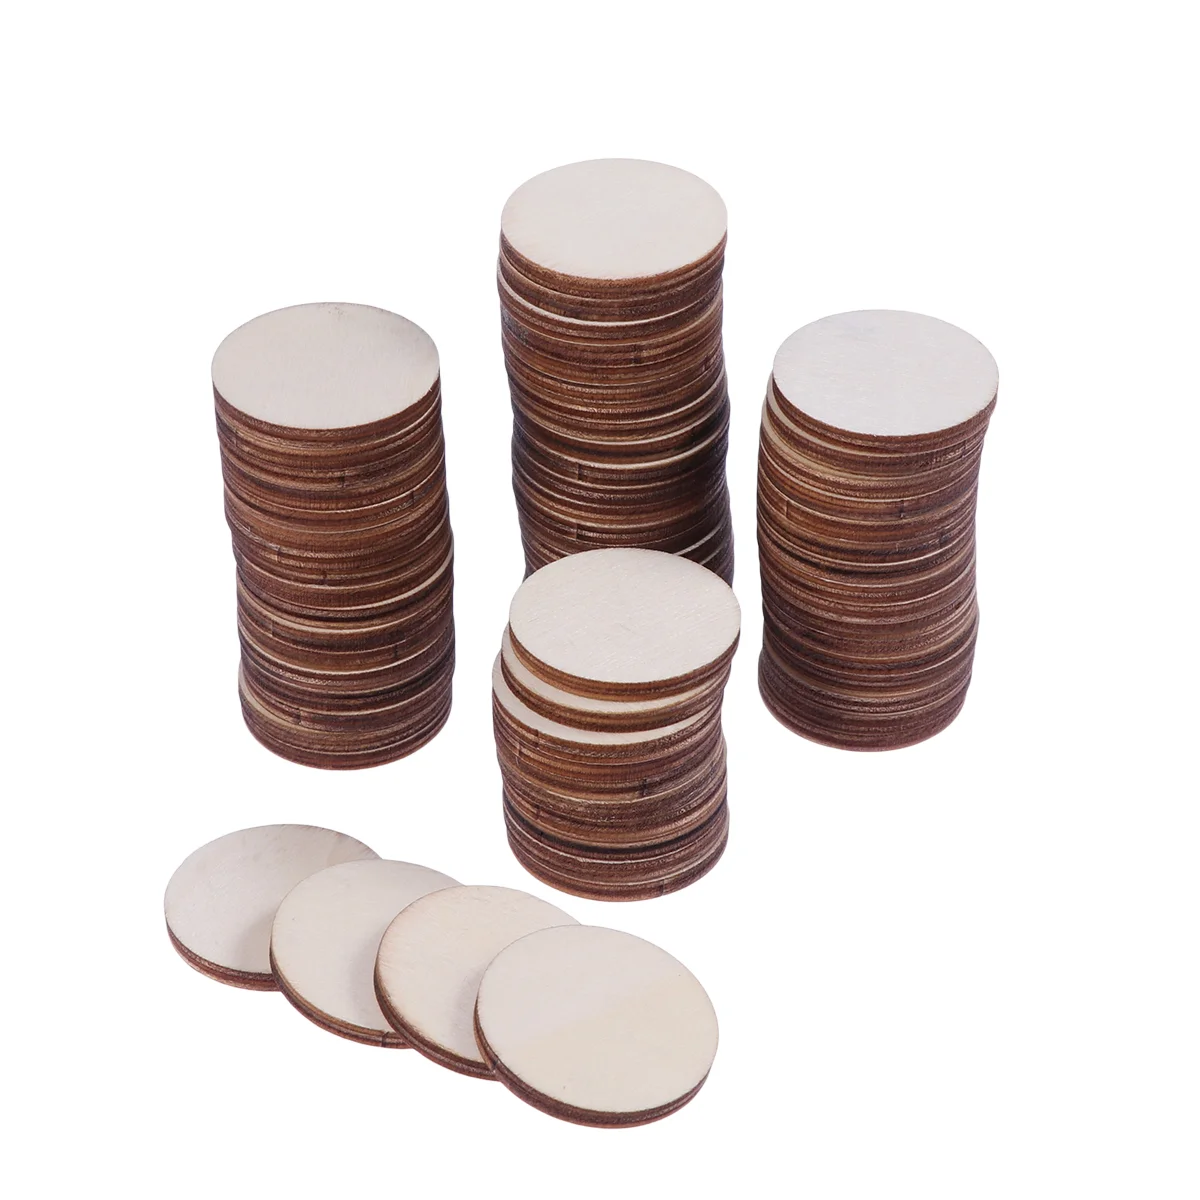 

Wood Wooden Round Pieces Piece Unfinished Craft Circles Blank Crafts Woods Slices Cutout Discs Slice Diy Cutouts Shapes